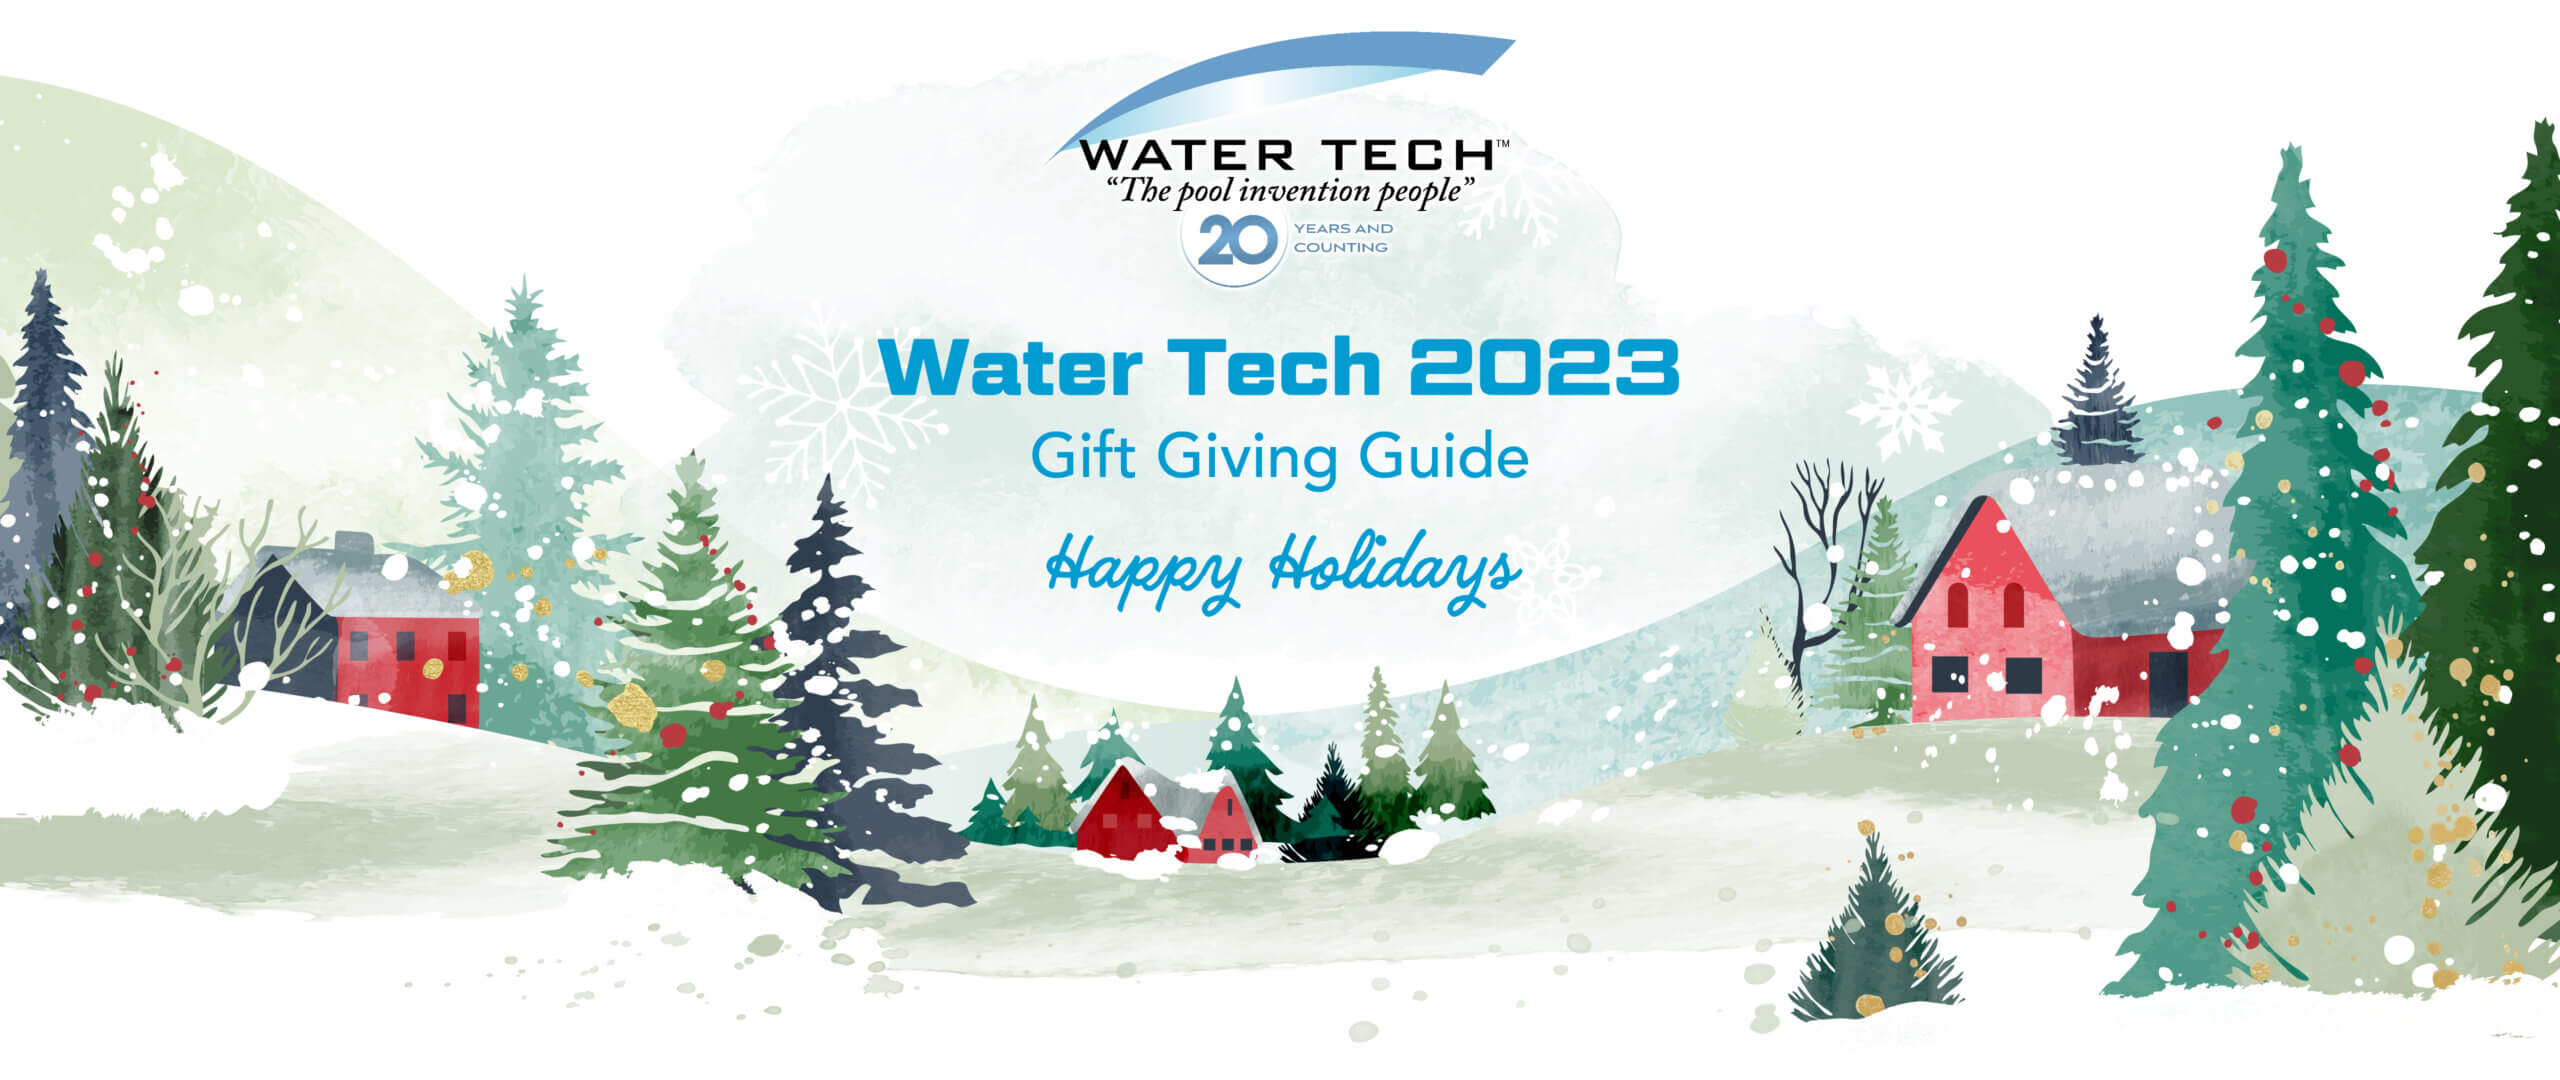 WaterTech   Gift Giving Guide Graphic 1